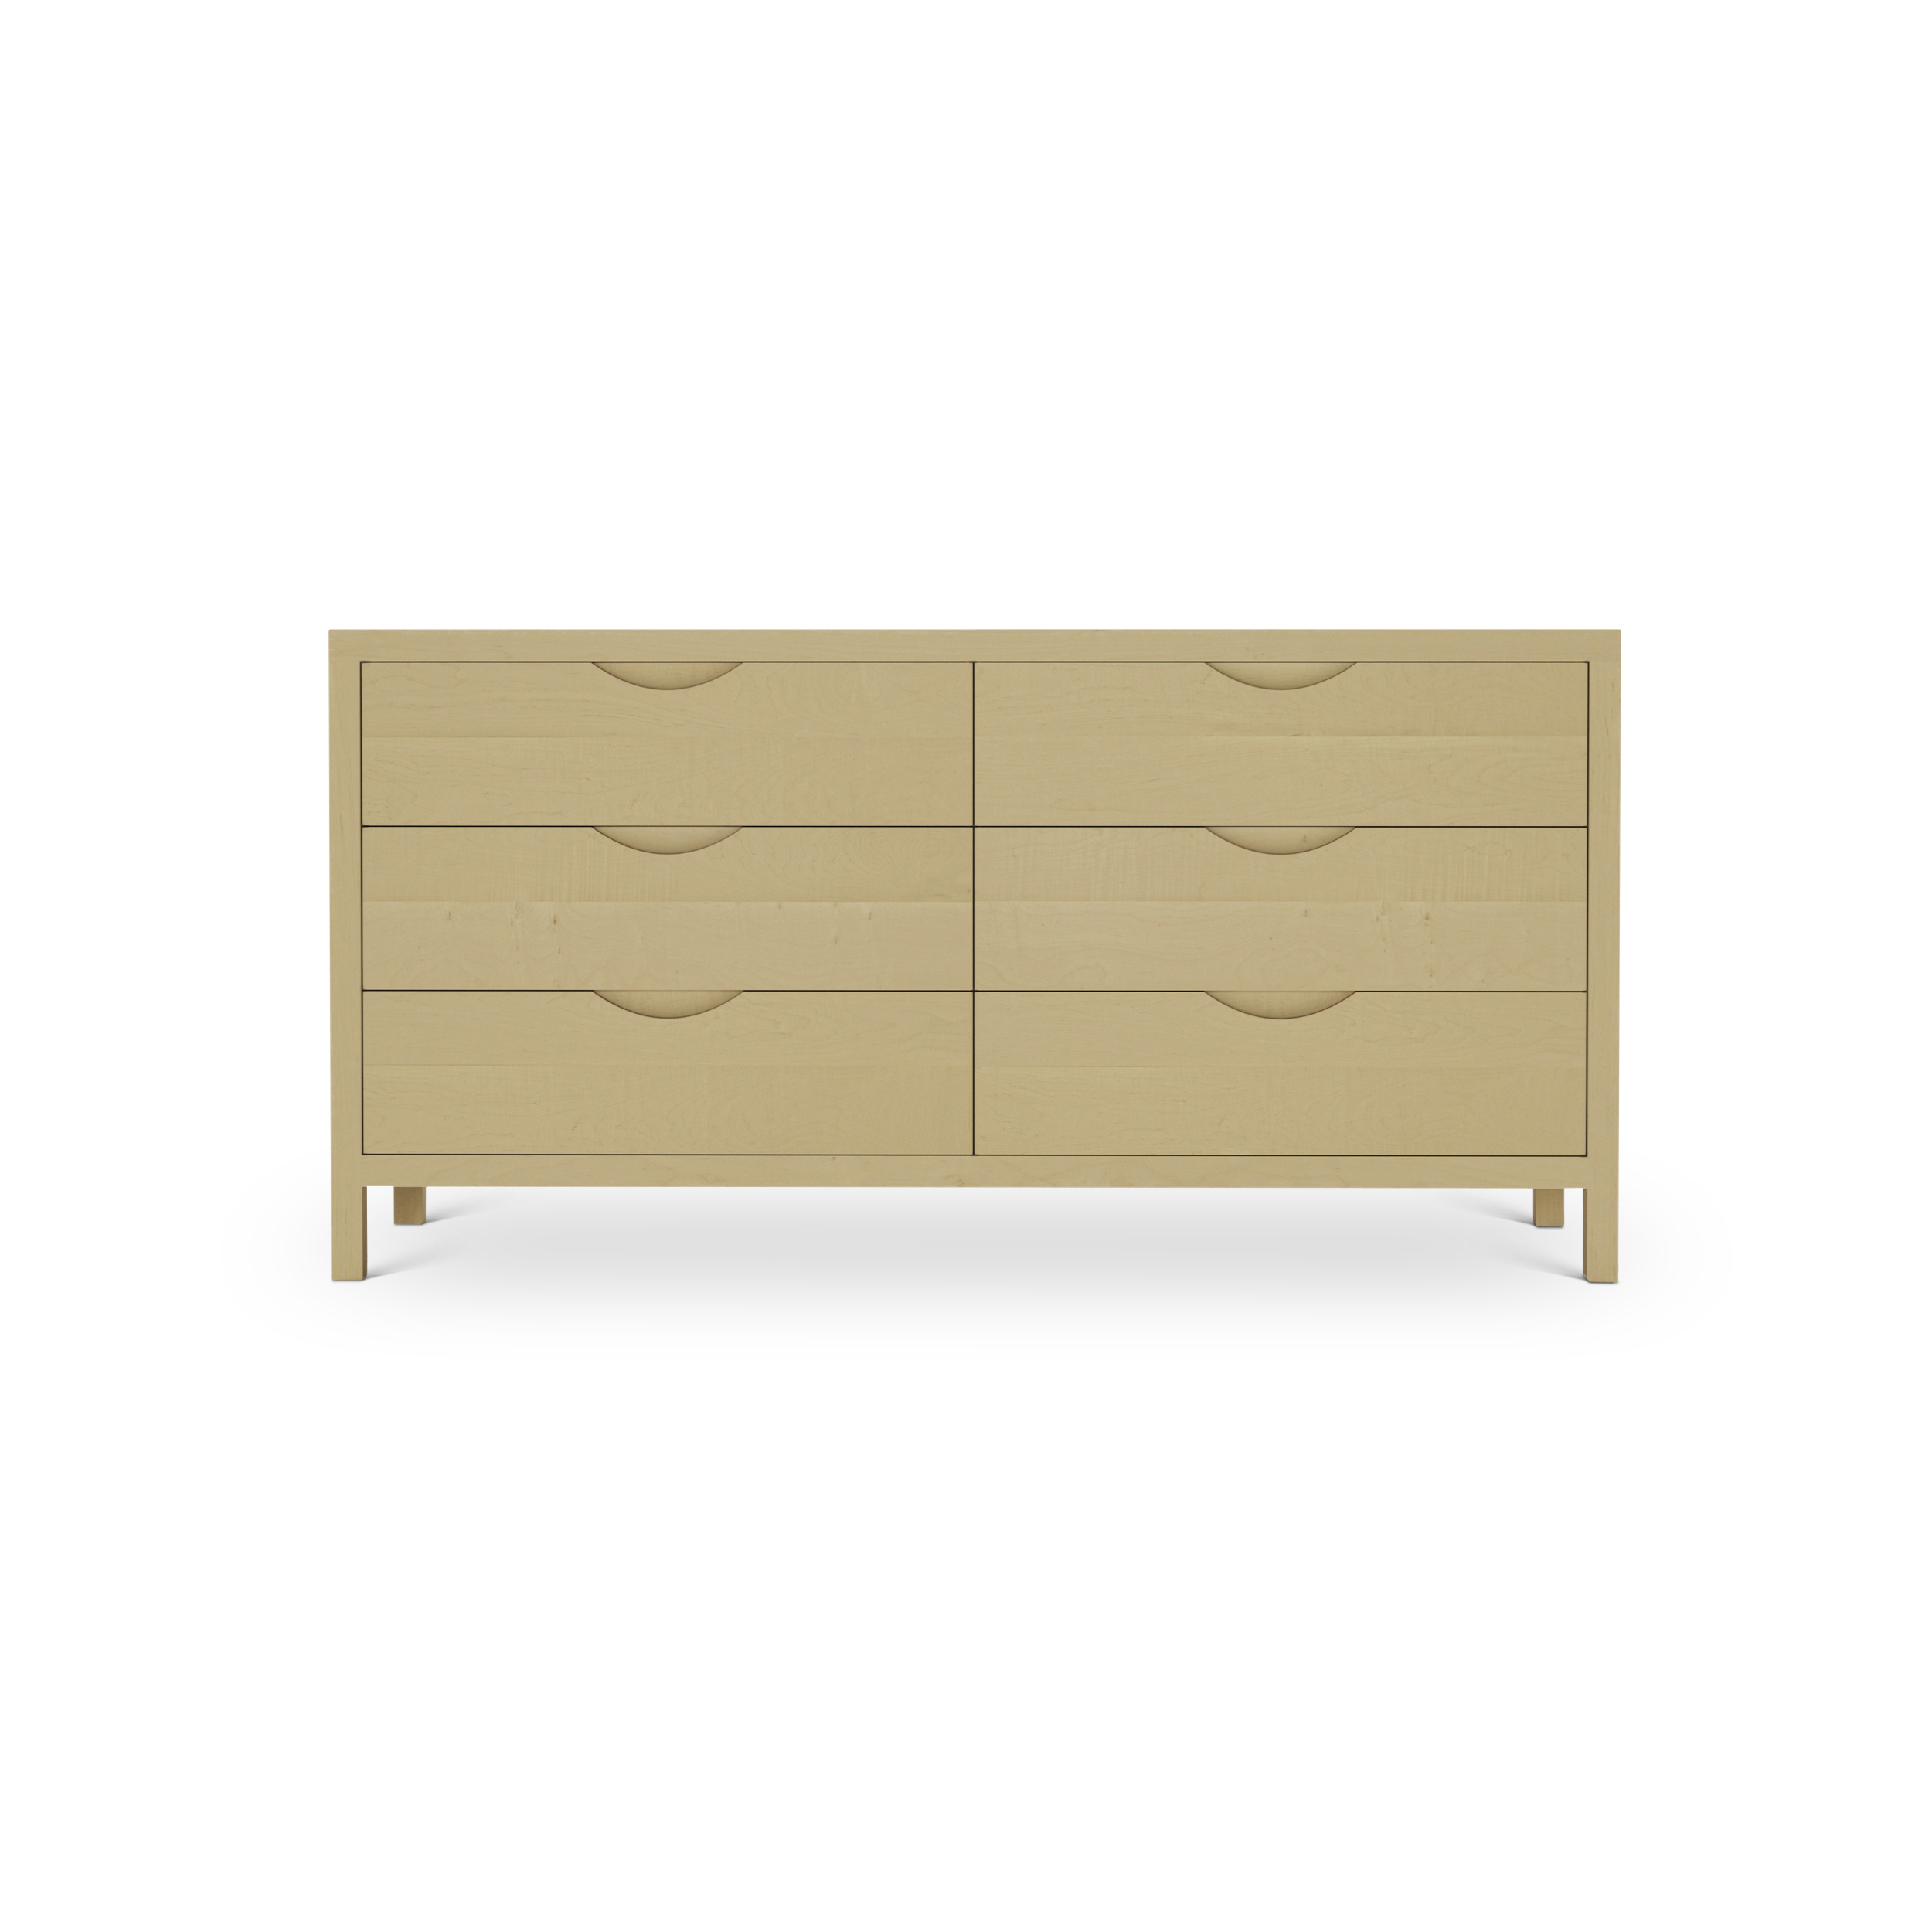 Series 353 Dresser With Six Drawers At 60″ In Width